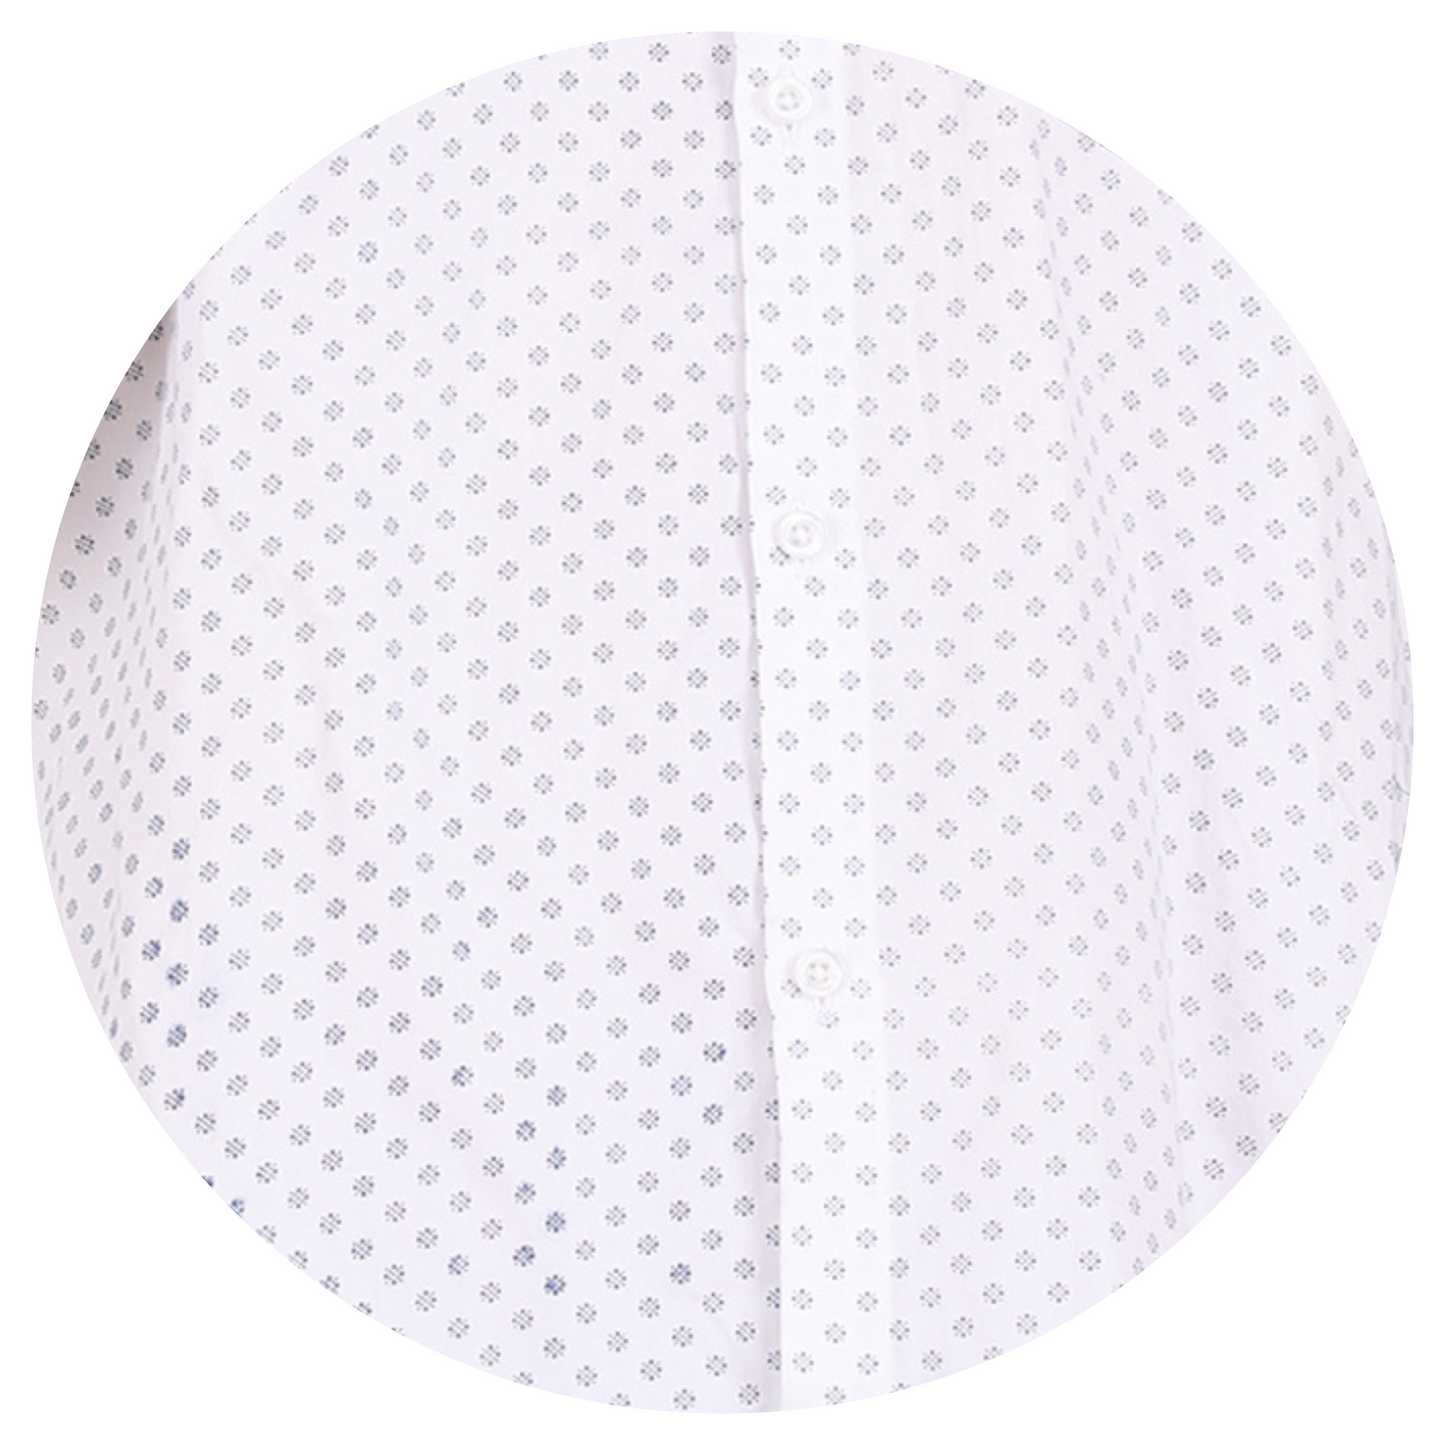 Classic Vibes: Printed White Shirt with Polka Pattern | Men's Fashion